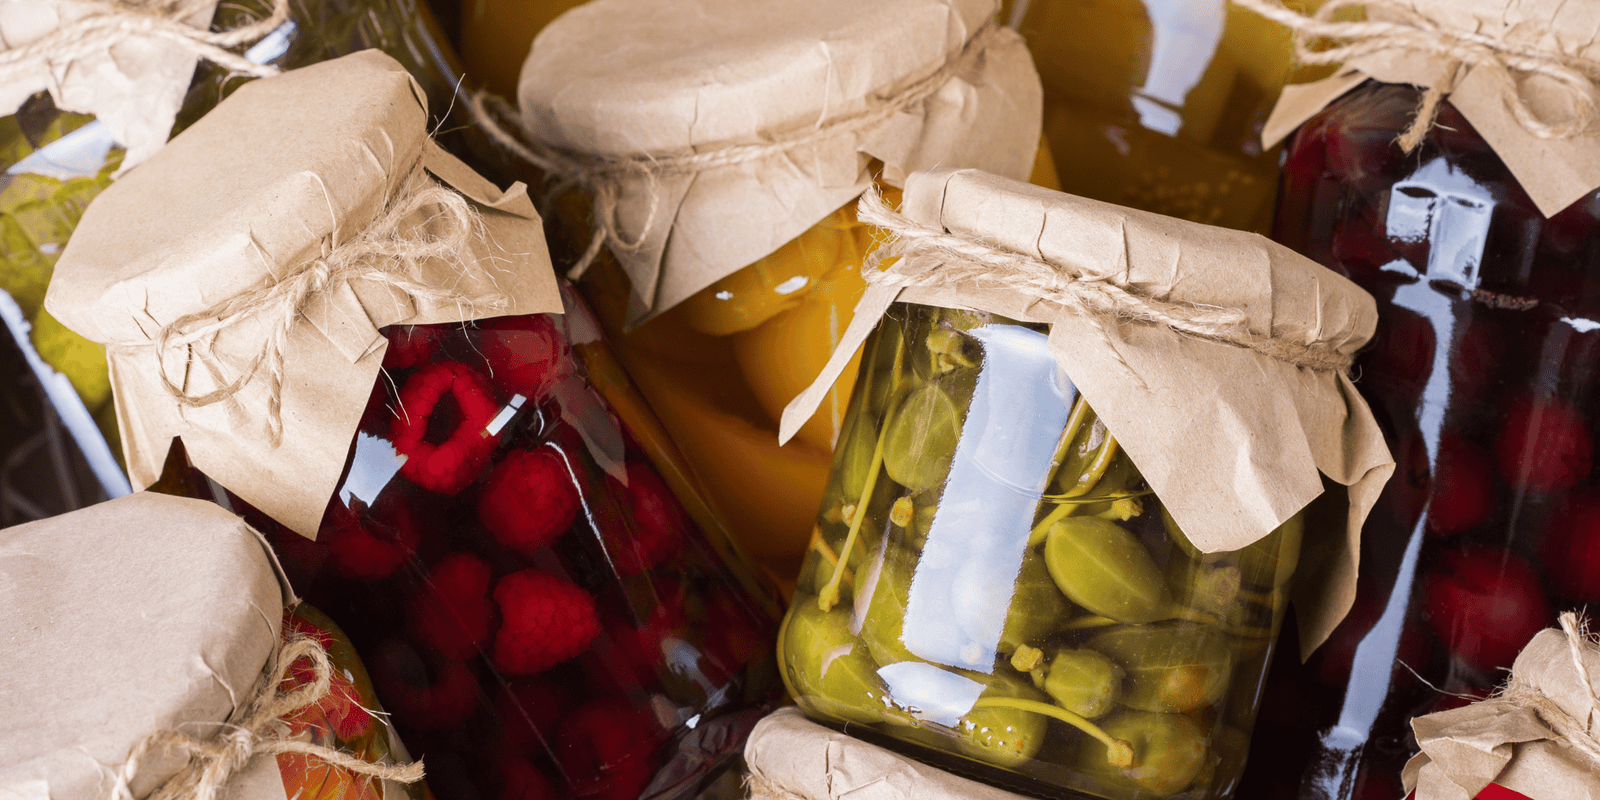 Benefits of Fermented Food